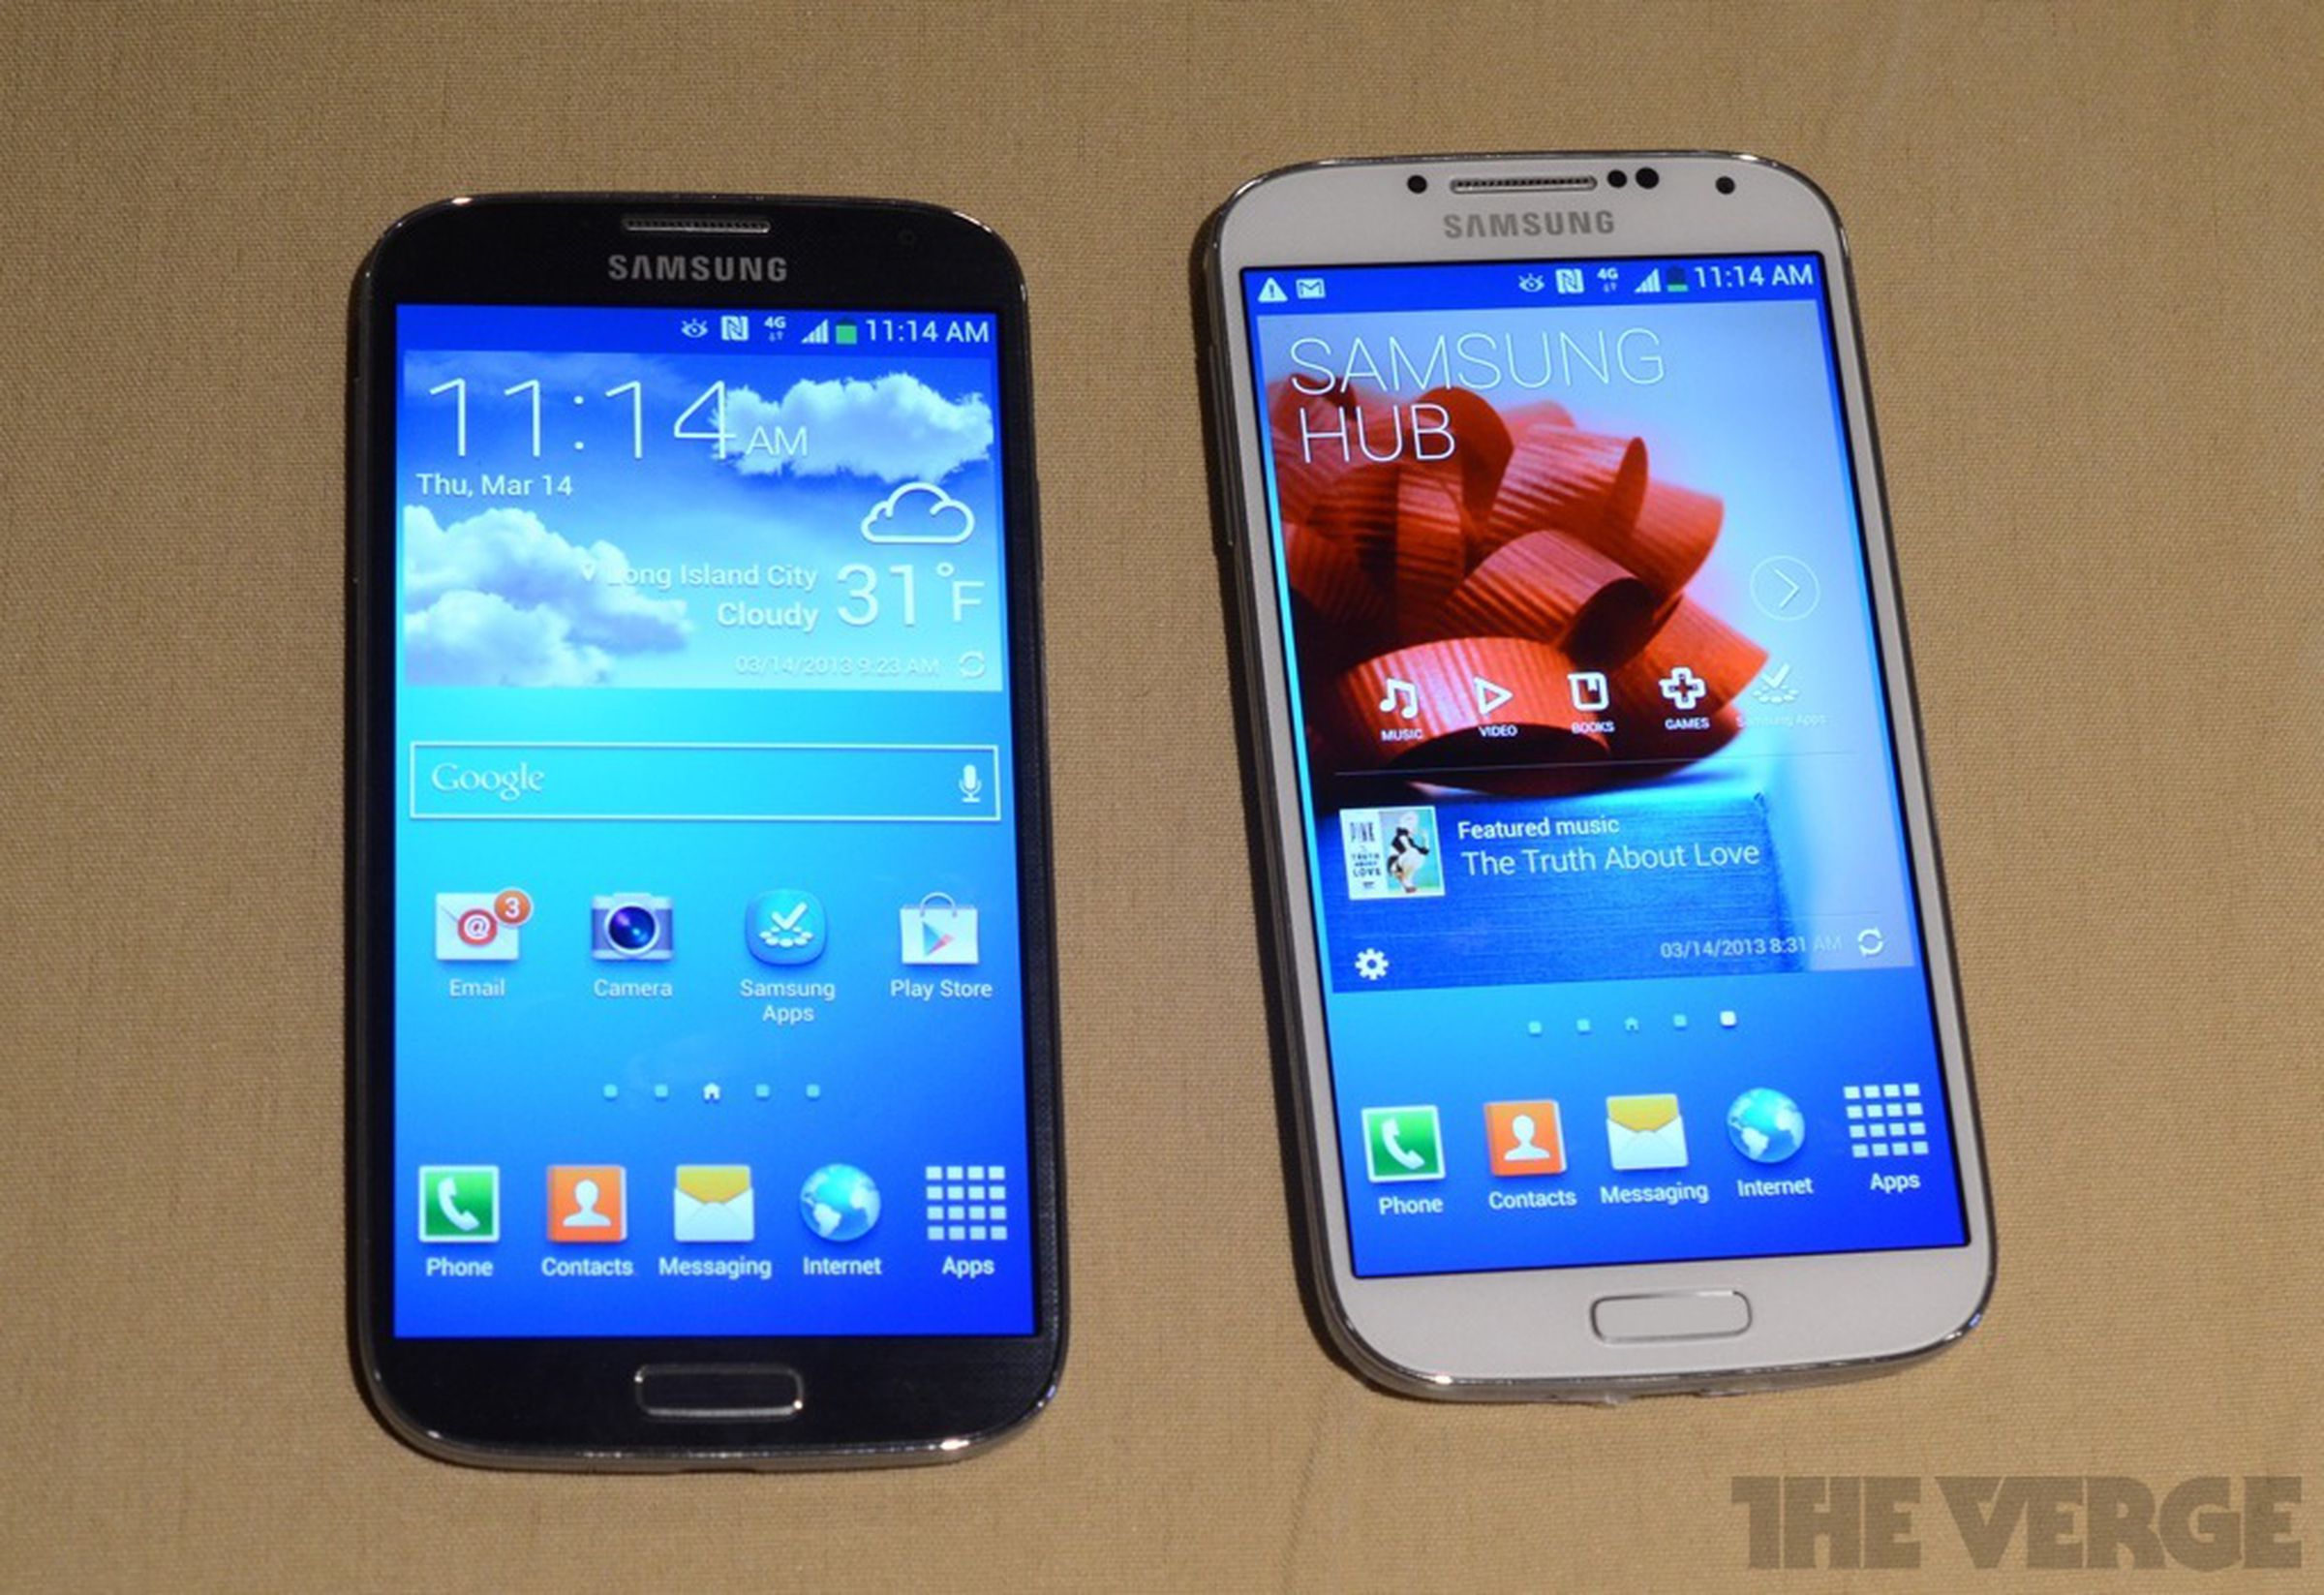 Samsung Galaxy S4 hands-on pictures